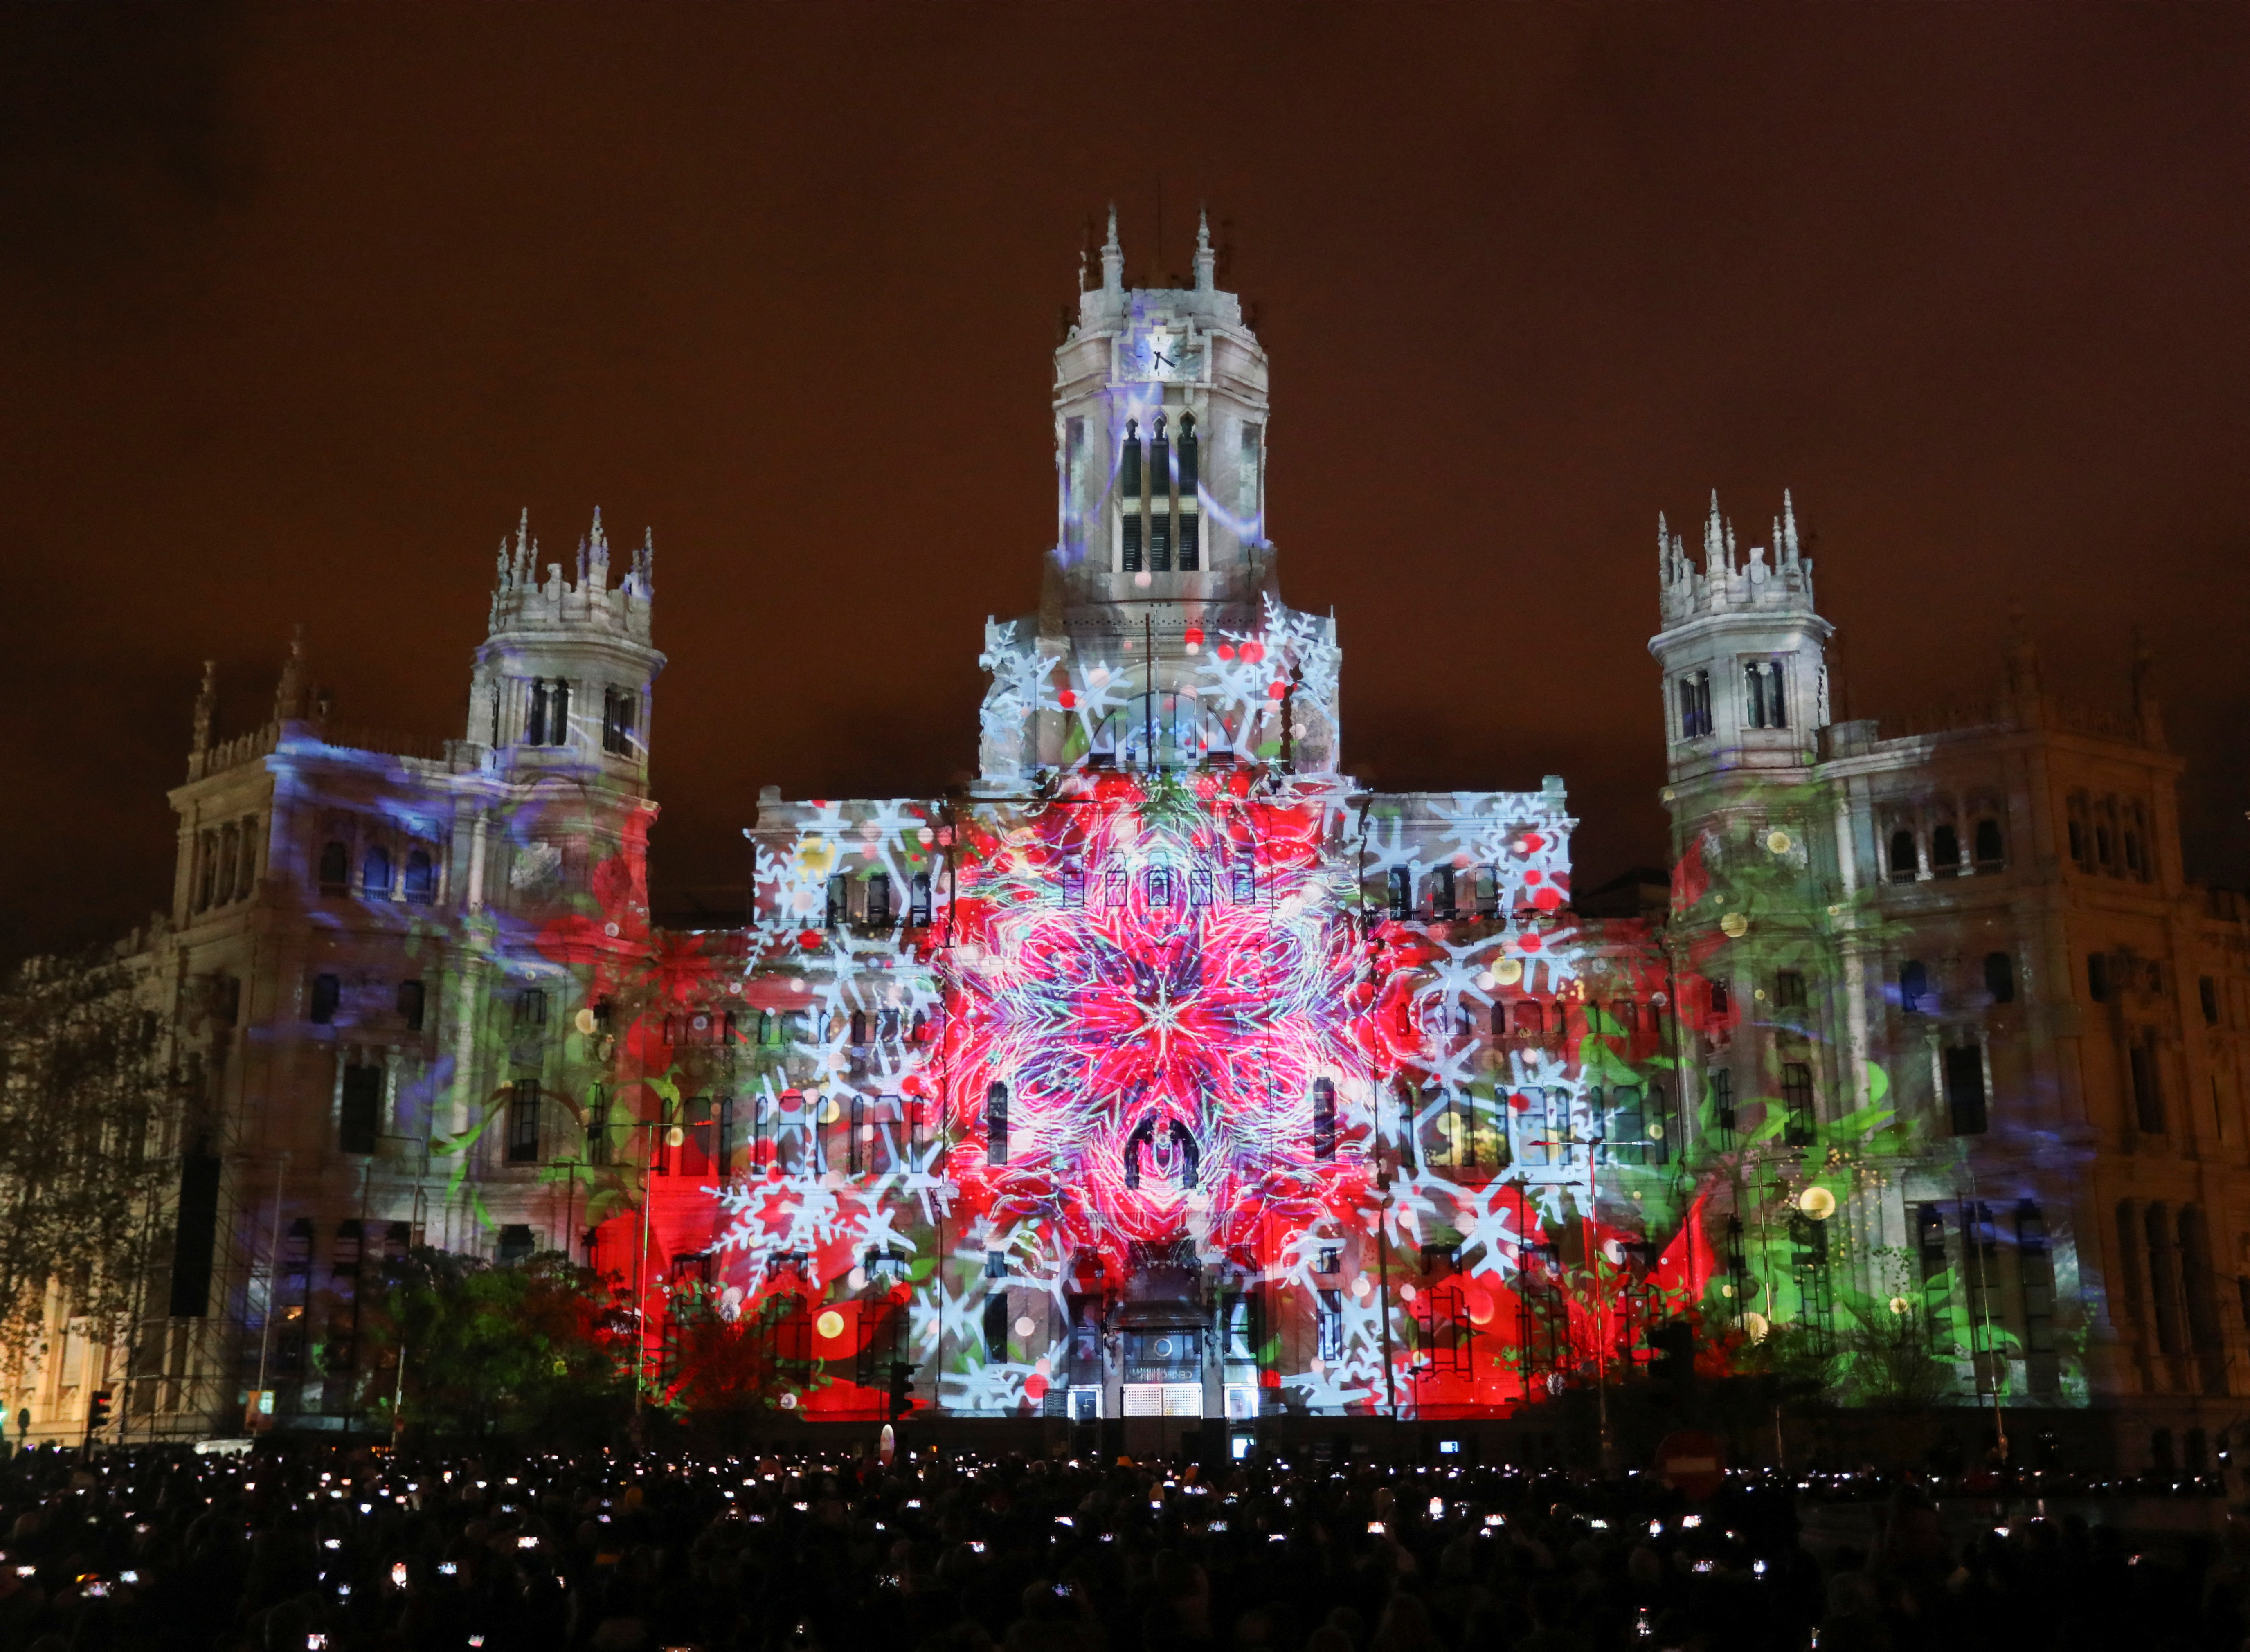 The Cibeles Palace, headquarters of the Madrid City Council, illuminated with Christmas lights, in Madrid, Spain, December 17, 2022. Image credit: Isabel Infantes via Reuters